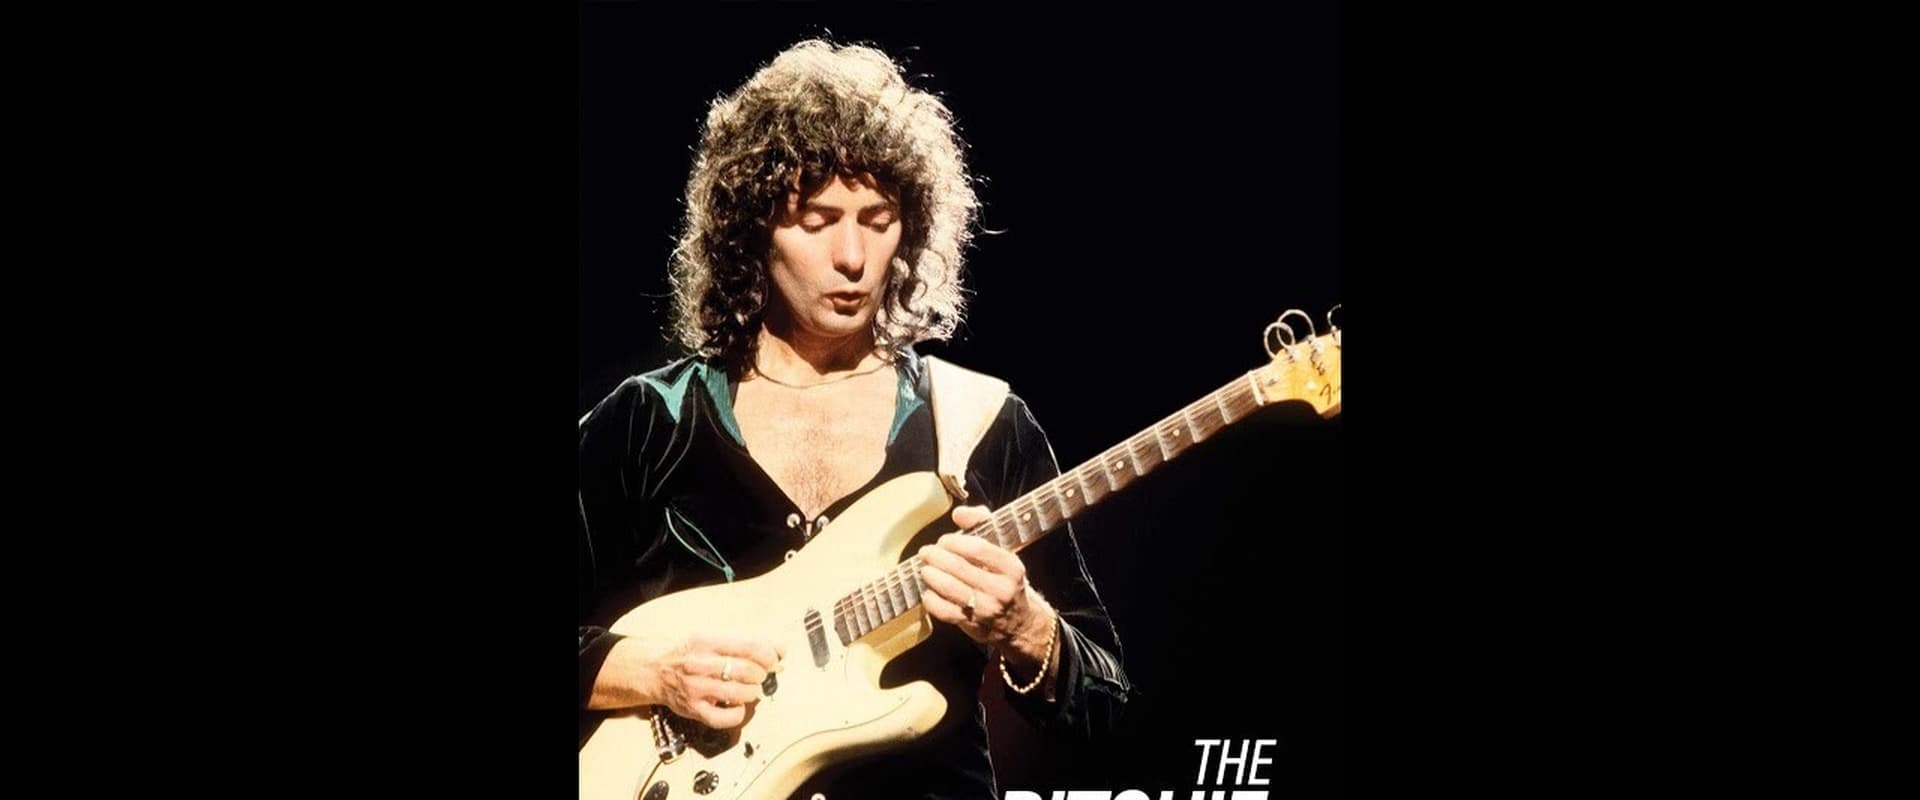 The Ritchie Blackmore Story